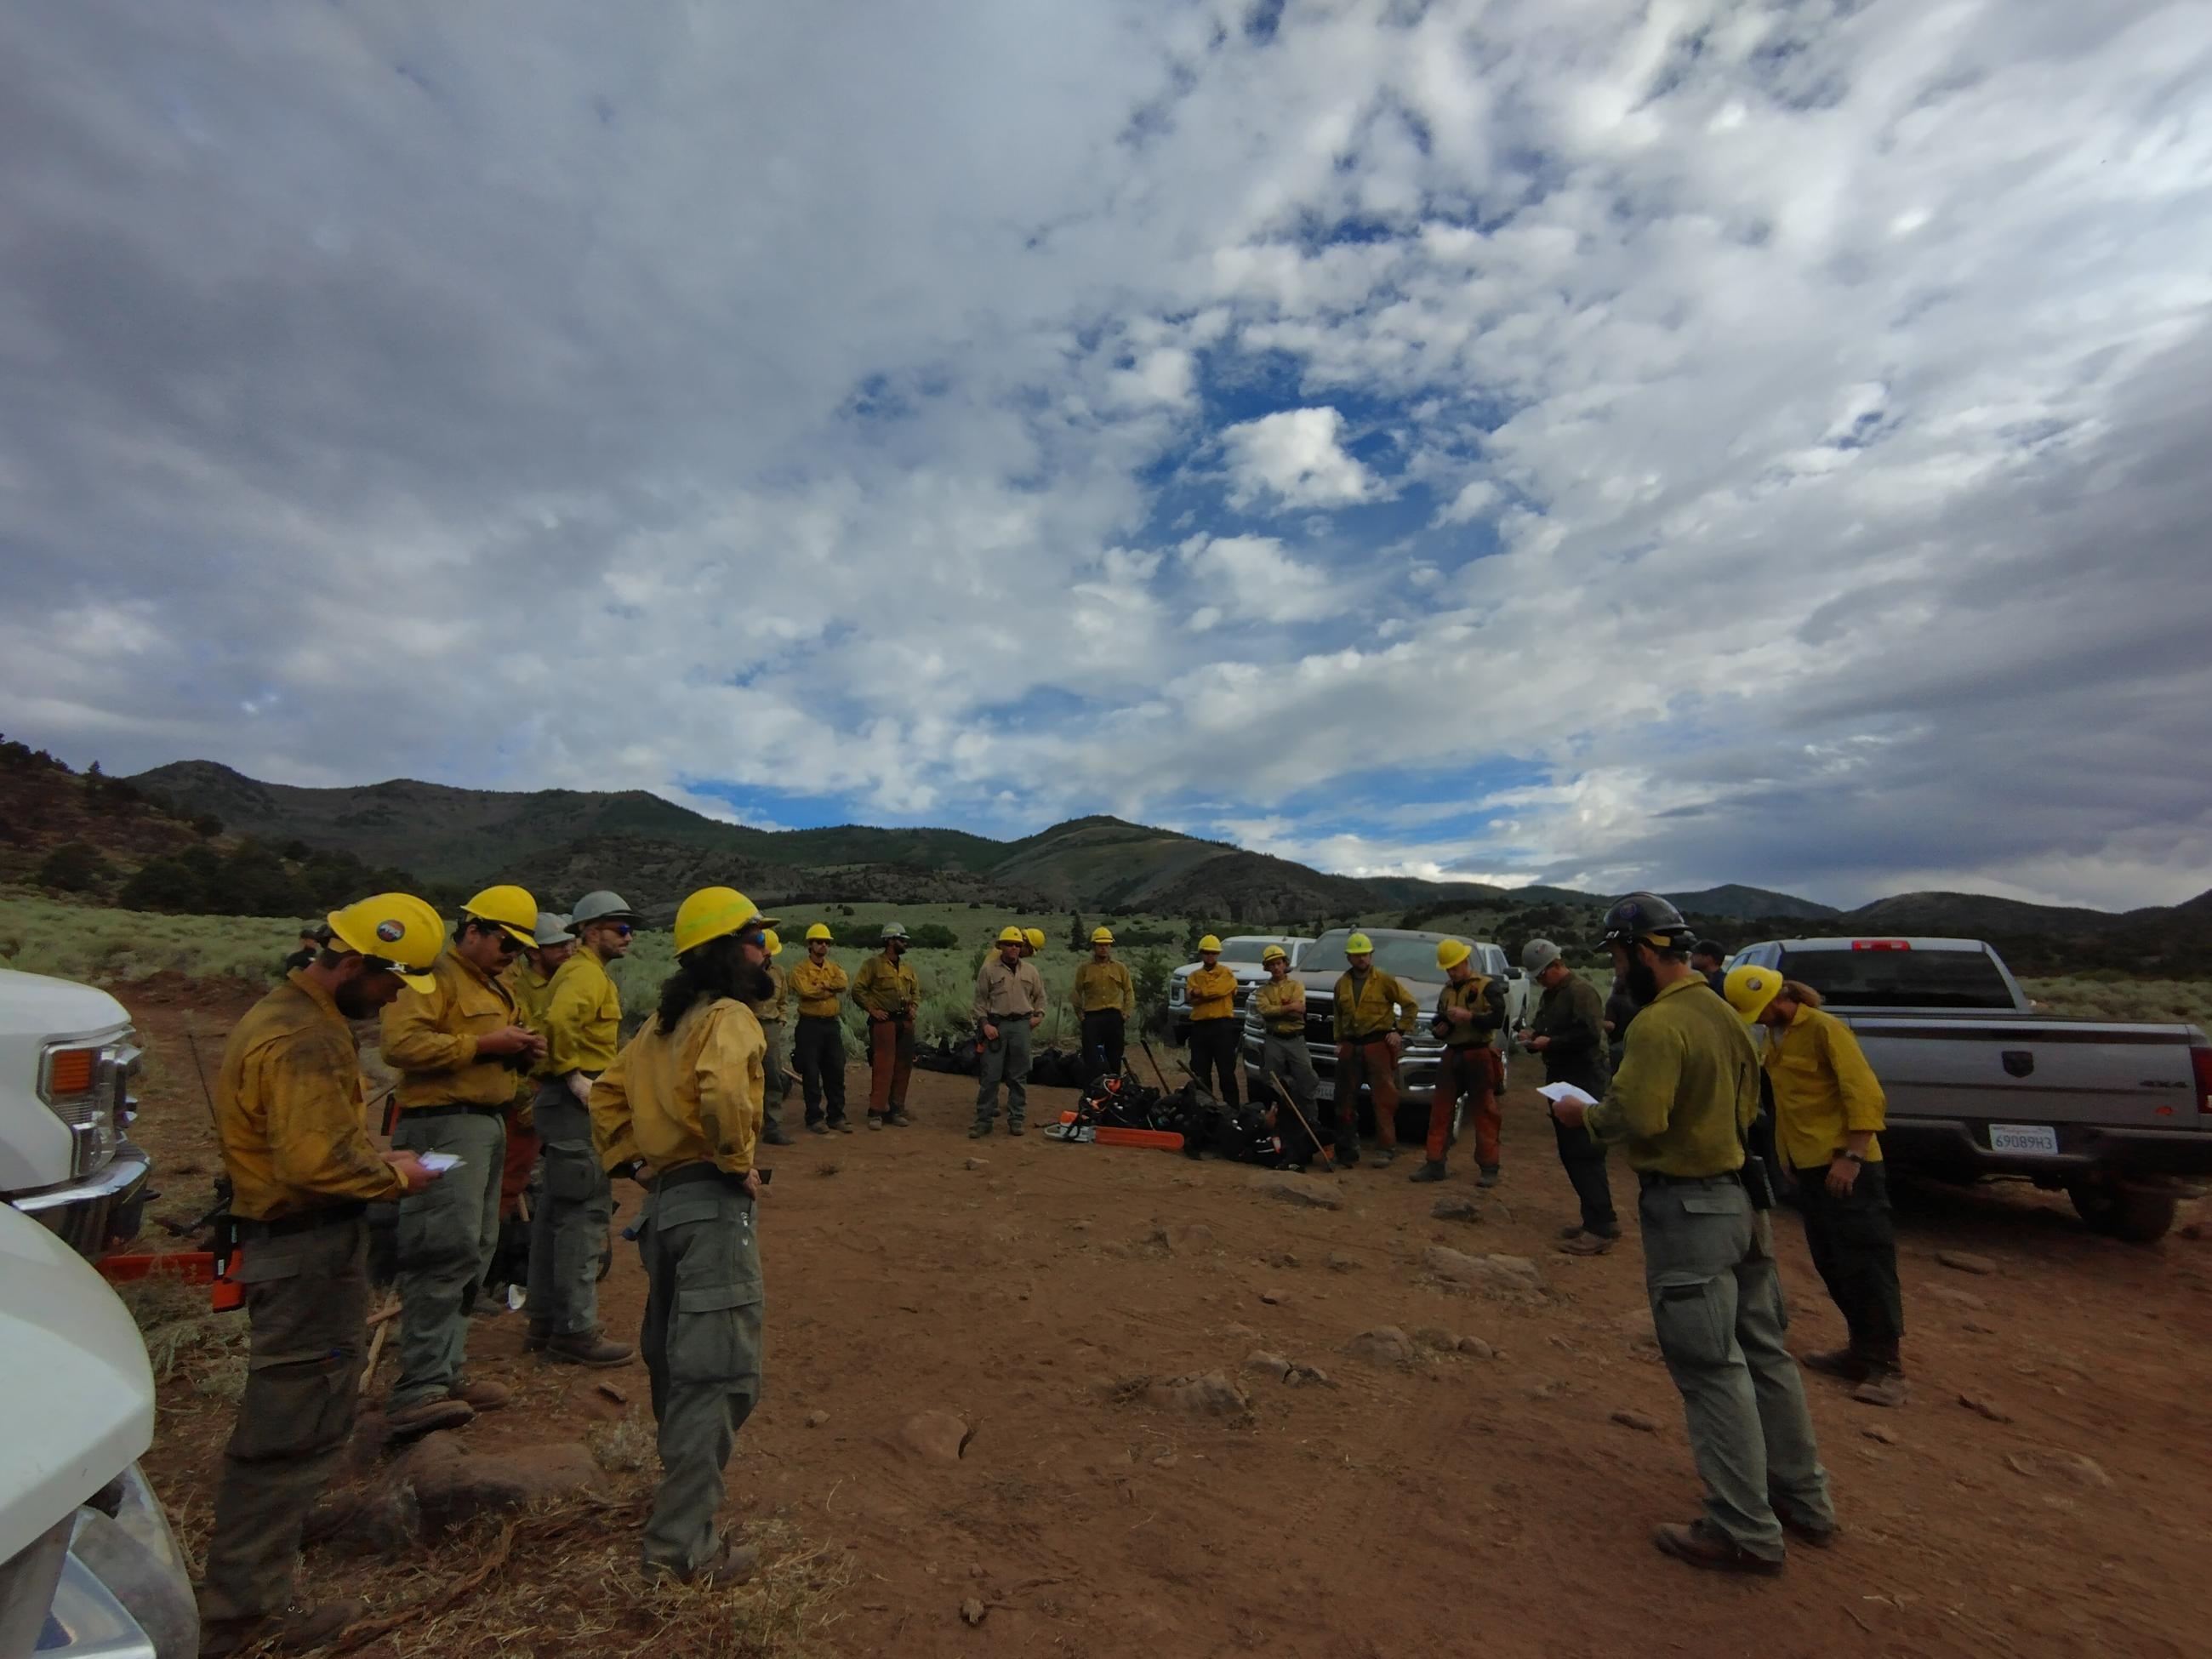 firefighters circled around to brief before hiking